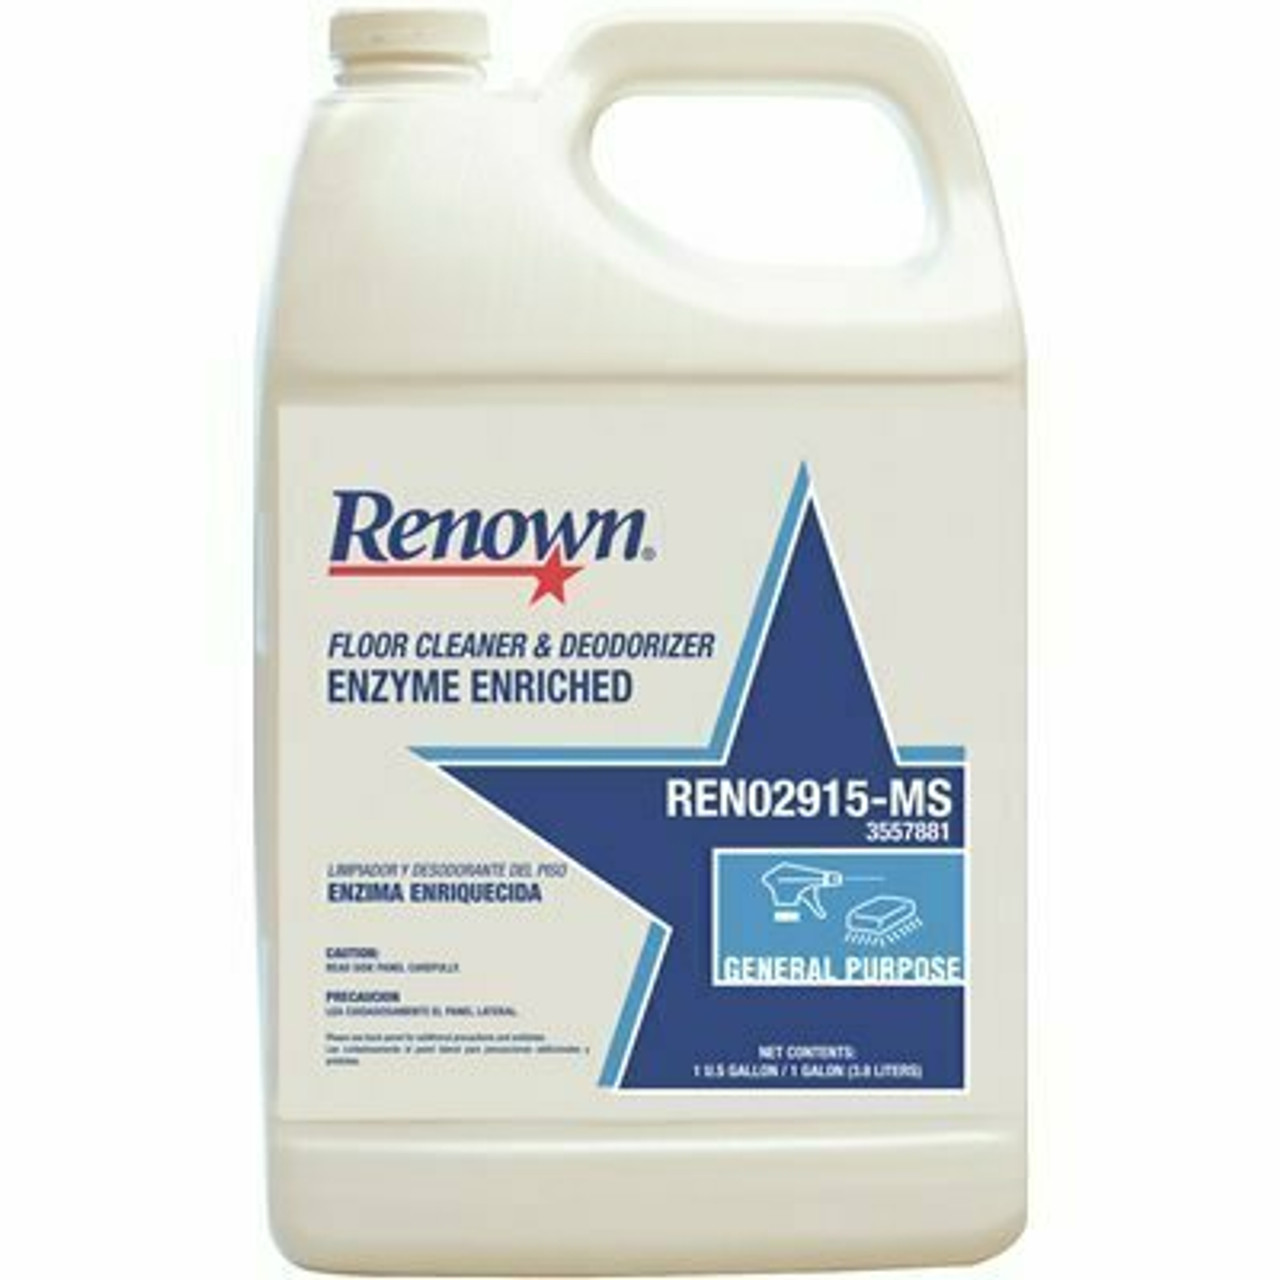 Renown Floor Cleaner And Deodorizer, Enzyme Enriched